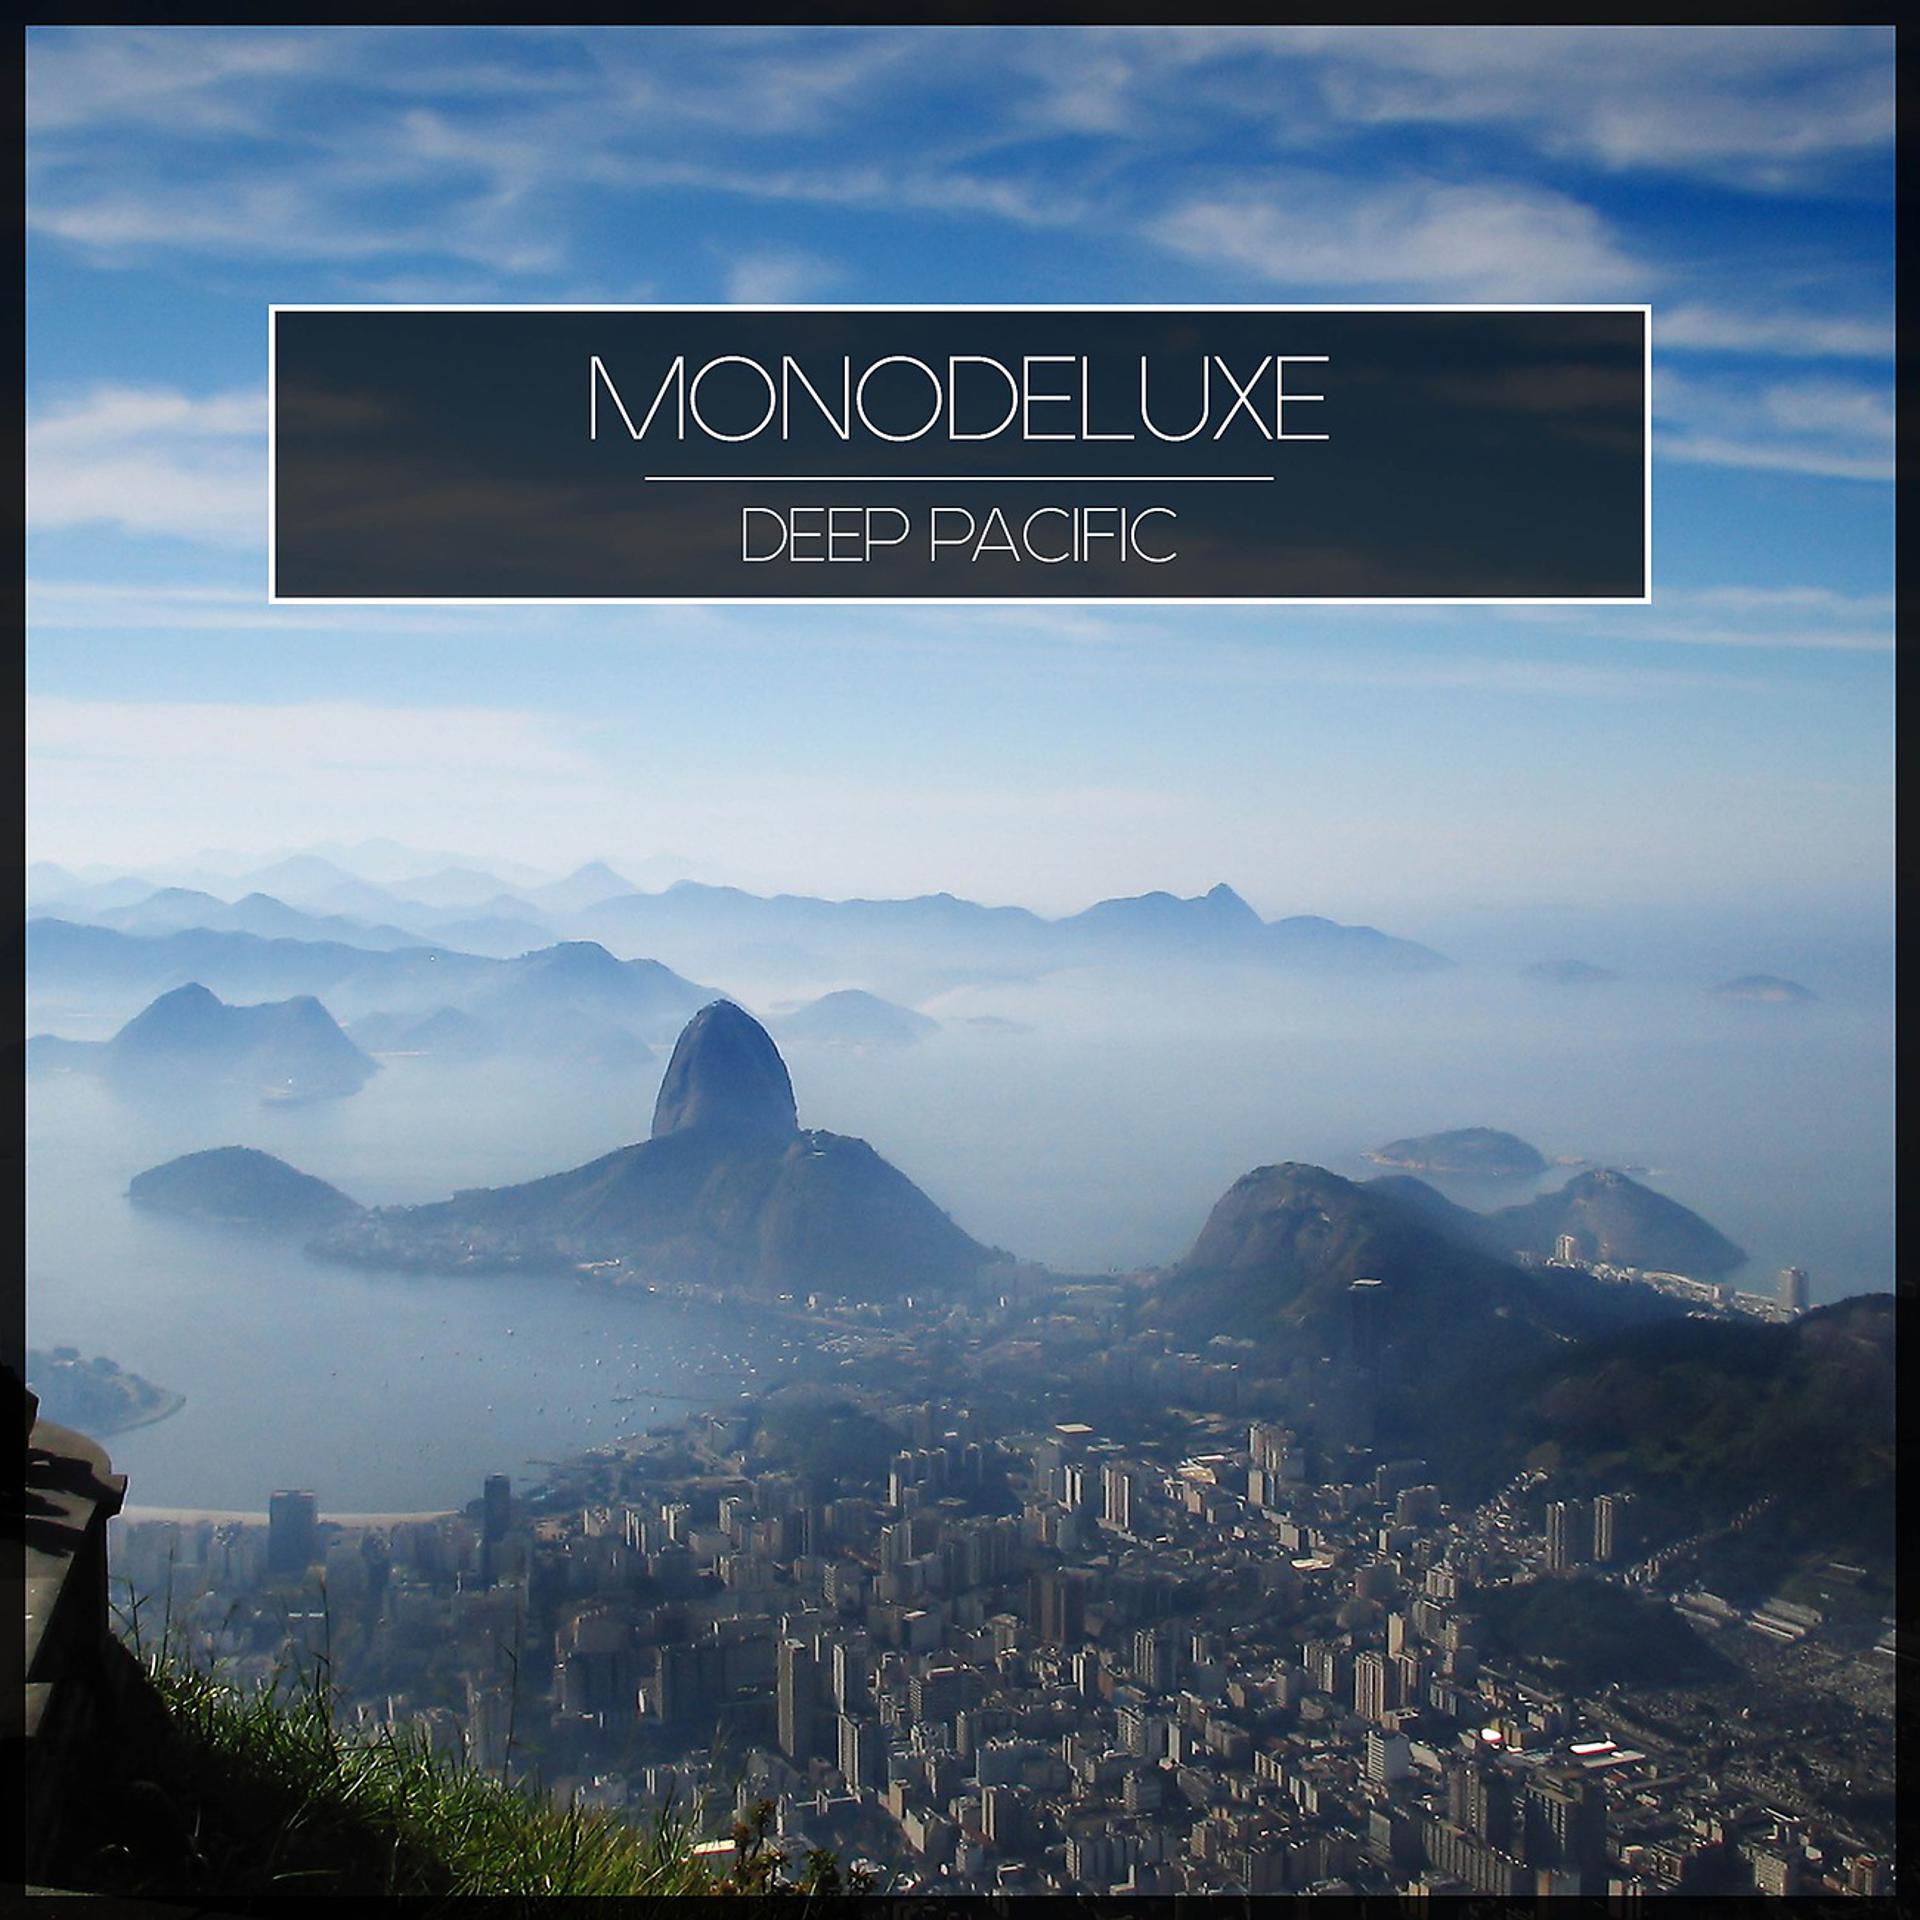 Пацифик чил. Monodeluxe. Monodeluxe - think Vibe (2011). Record Chillout. Record Deep 2015.